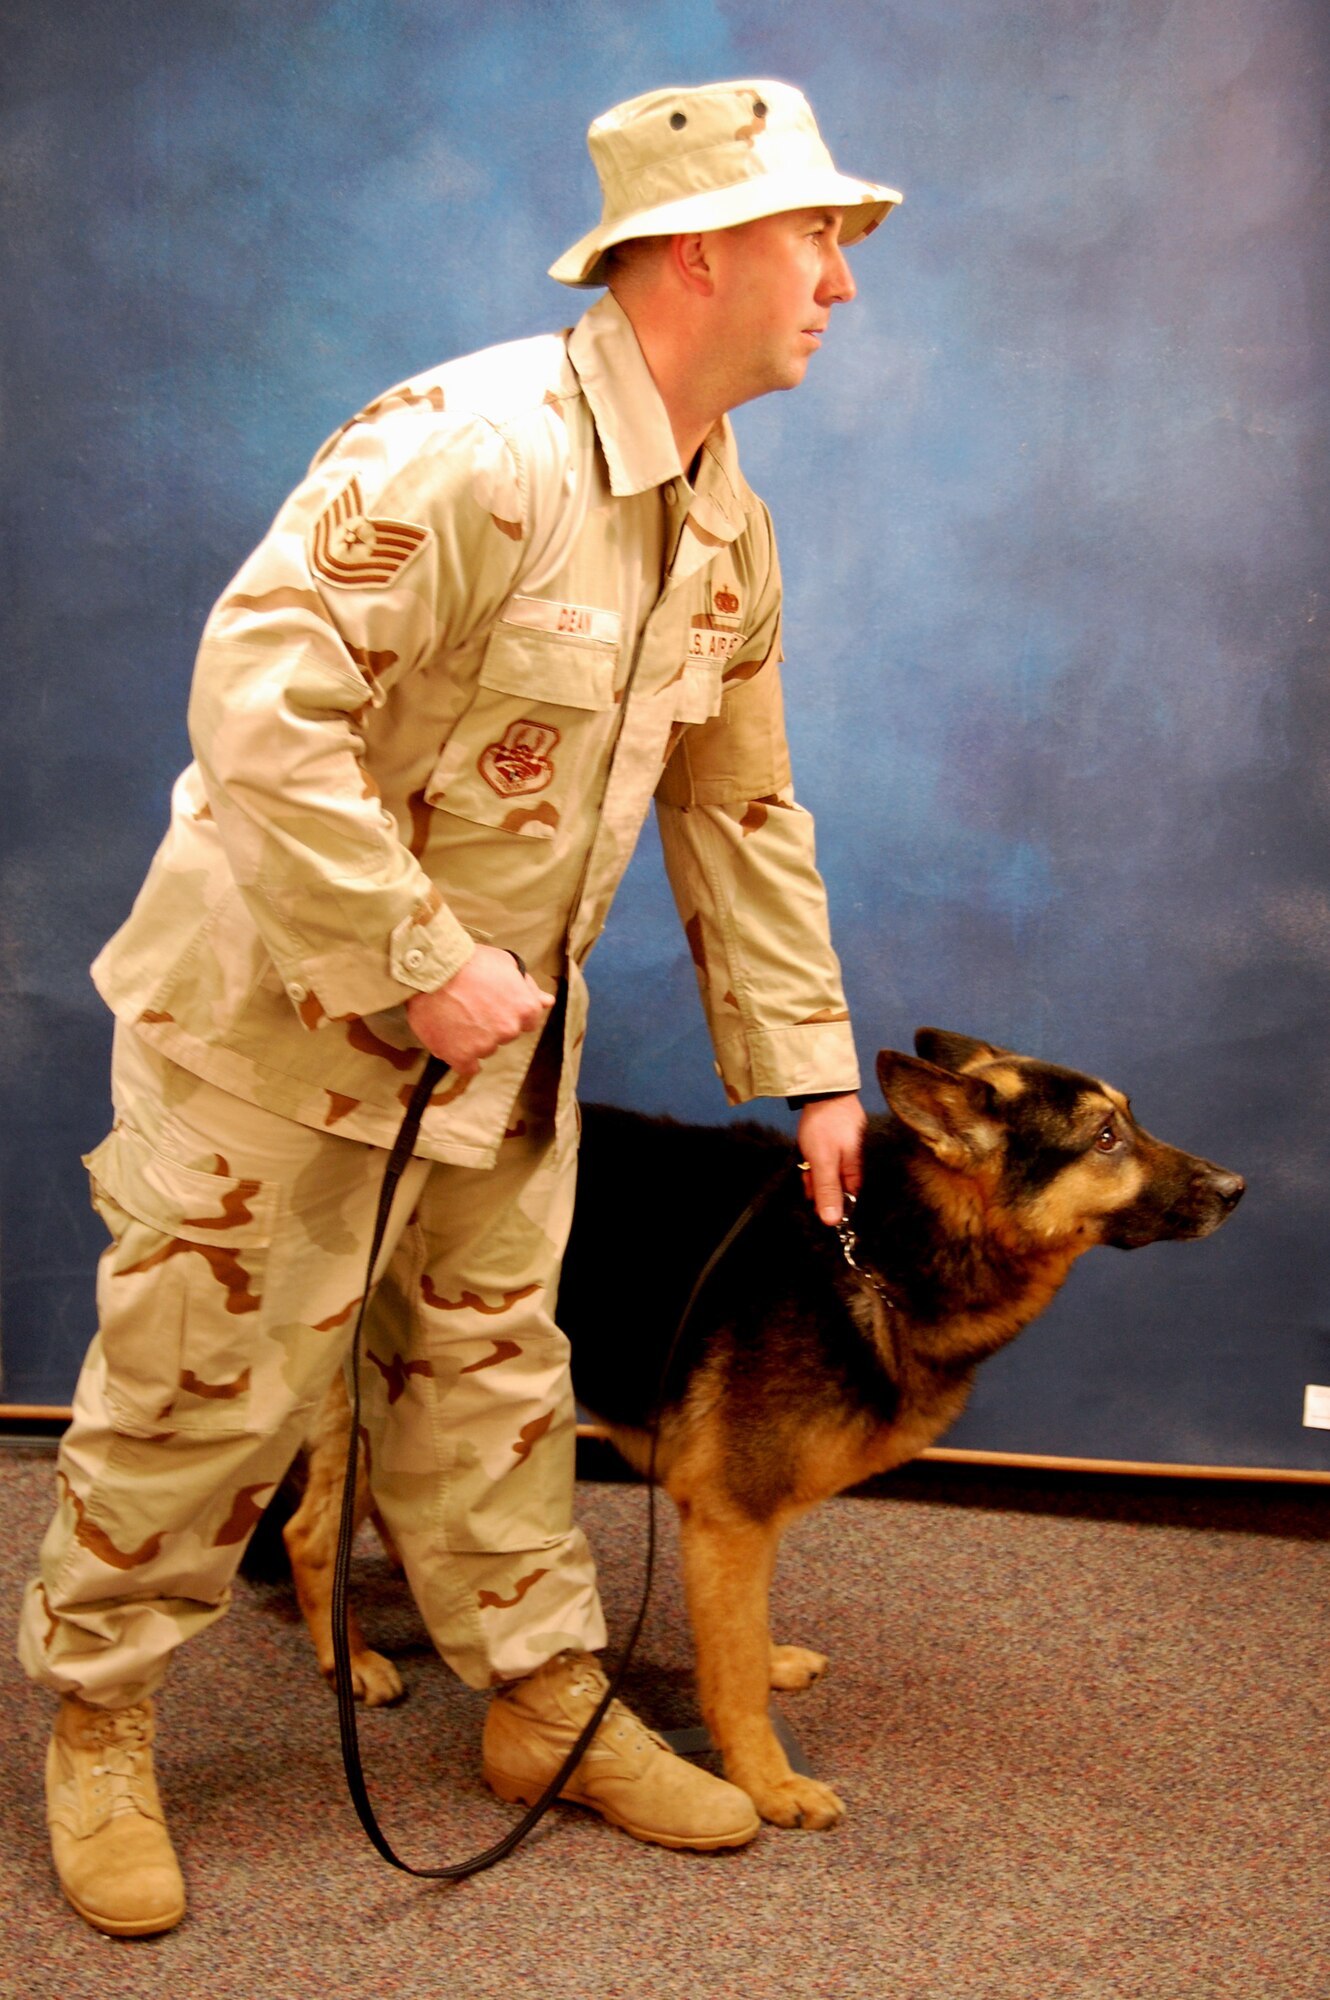 Tech. Sgt. Jeff Dean, security forces contingency skills instructor with the U.S. Air Force Expeditionary Center's 421st Combat Training Squadron, models for a photo Dec. 11, 2008, with military working dog Polo in the Expeditionary Center studio on Fort Dix, N.J.  The effort was part of preparatory work by an artist from the Air Force Art Program to complete a painting highlighting Expeditionary Center Airmen. (U.S. Air Force Photo/Tech. Sgt. Scott T. Sturkol)